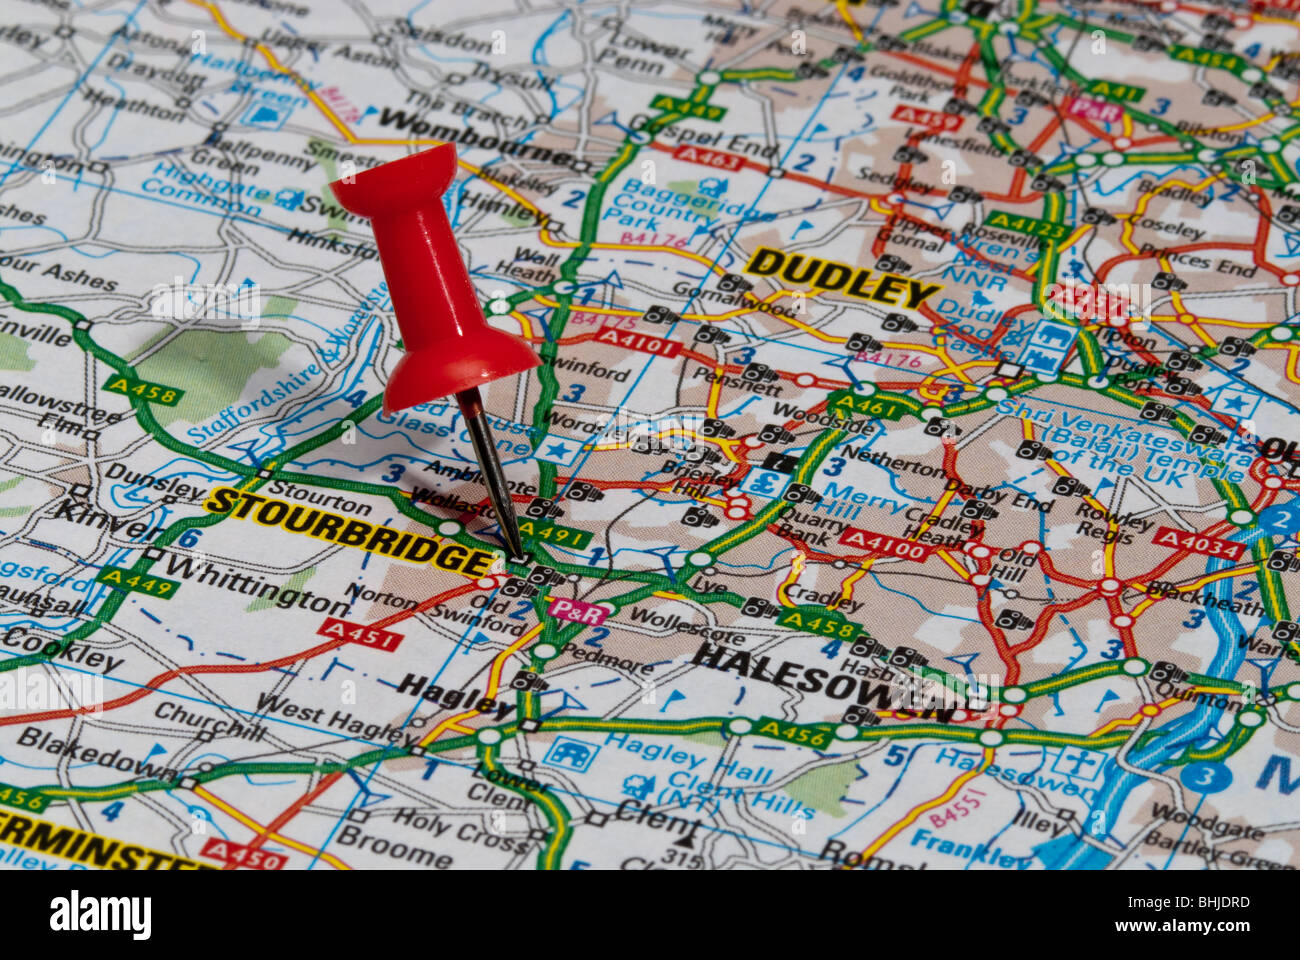 red map pin in road map pointing to city of Stourbridge Stock Photo